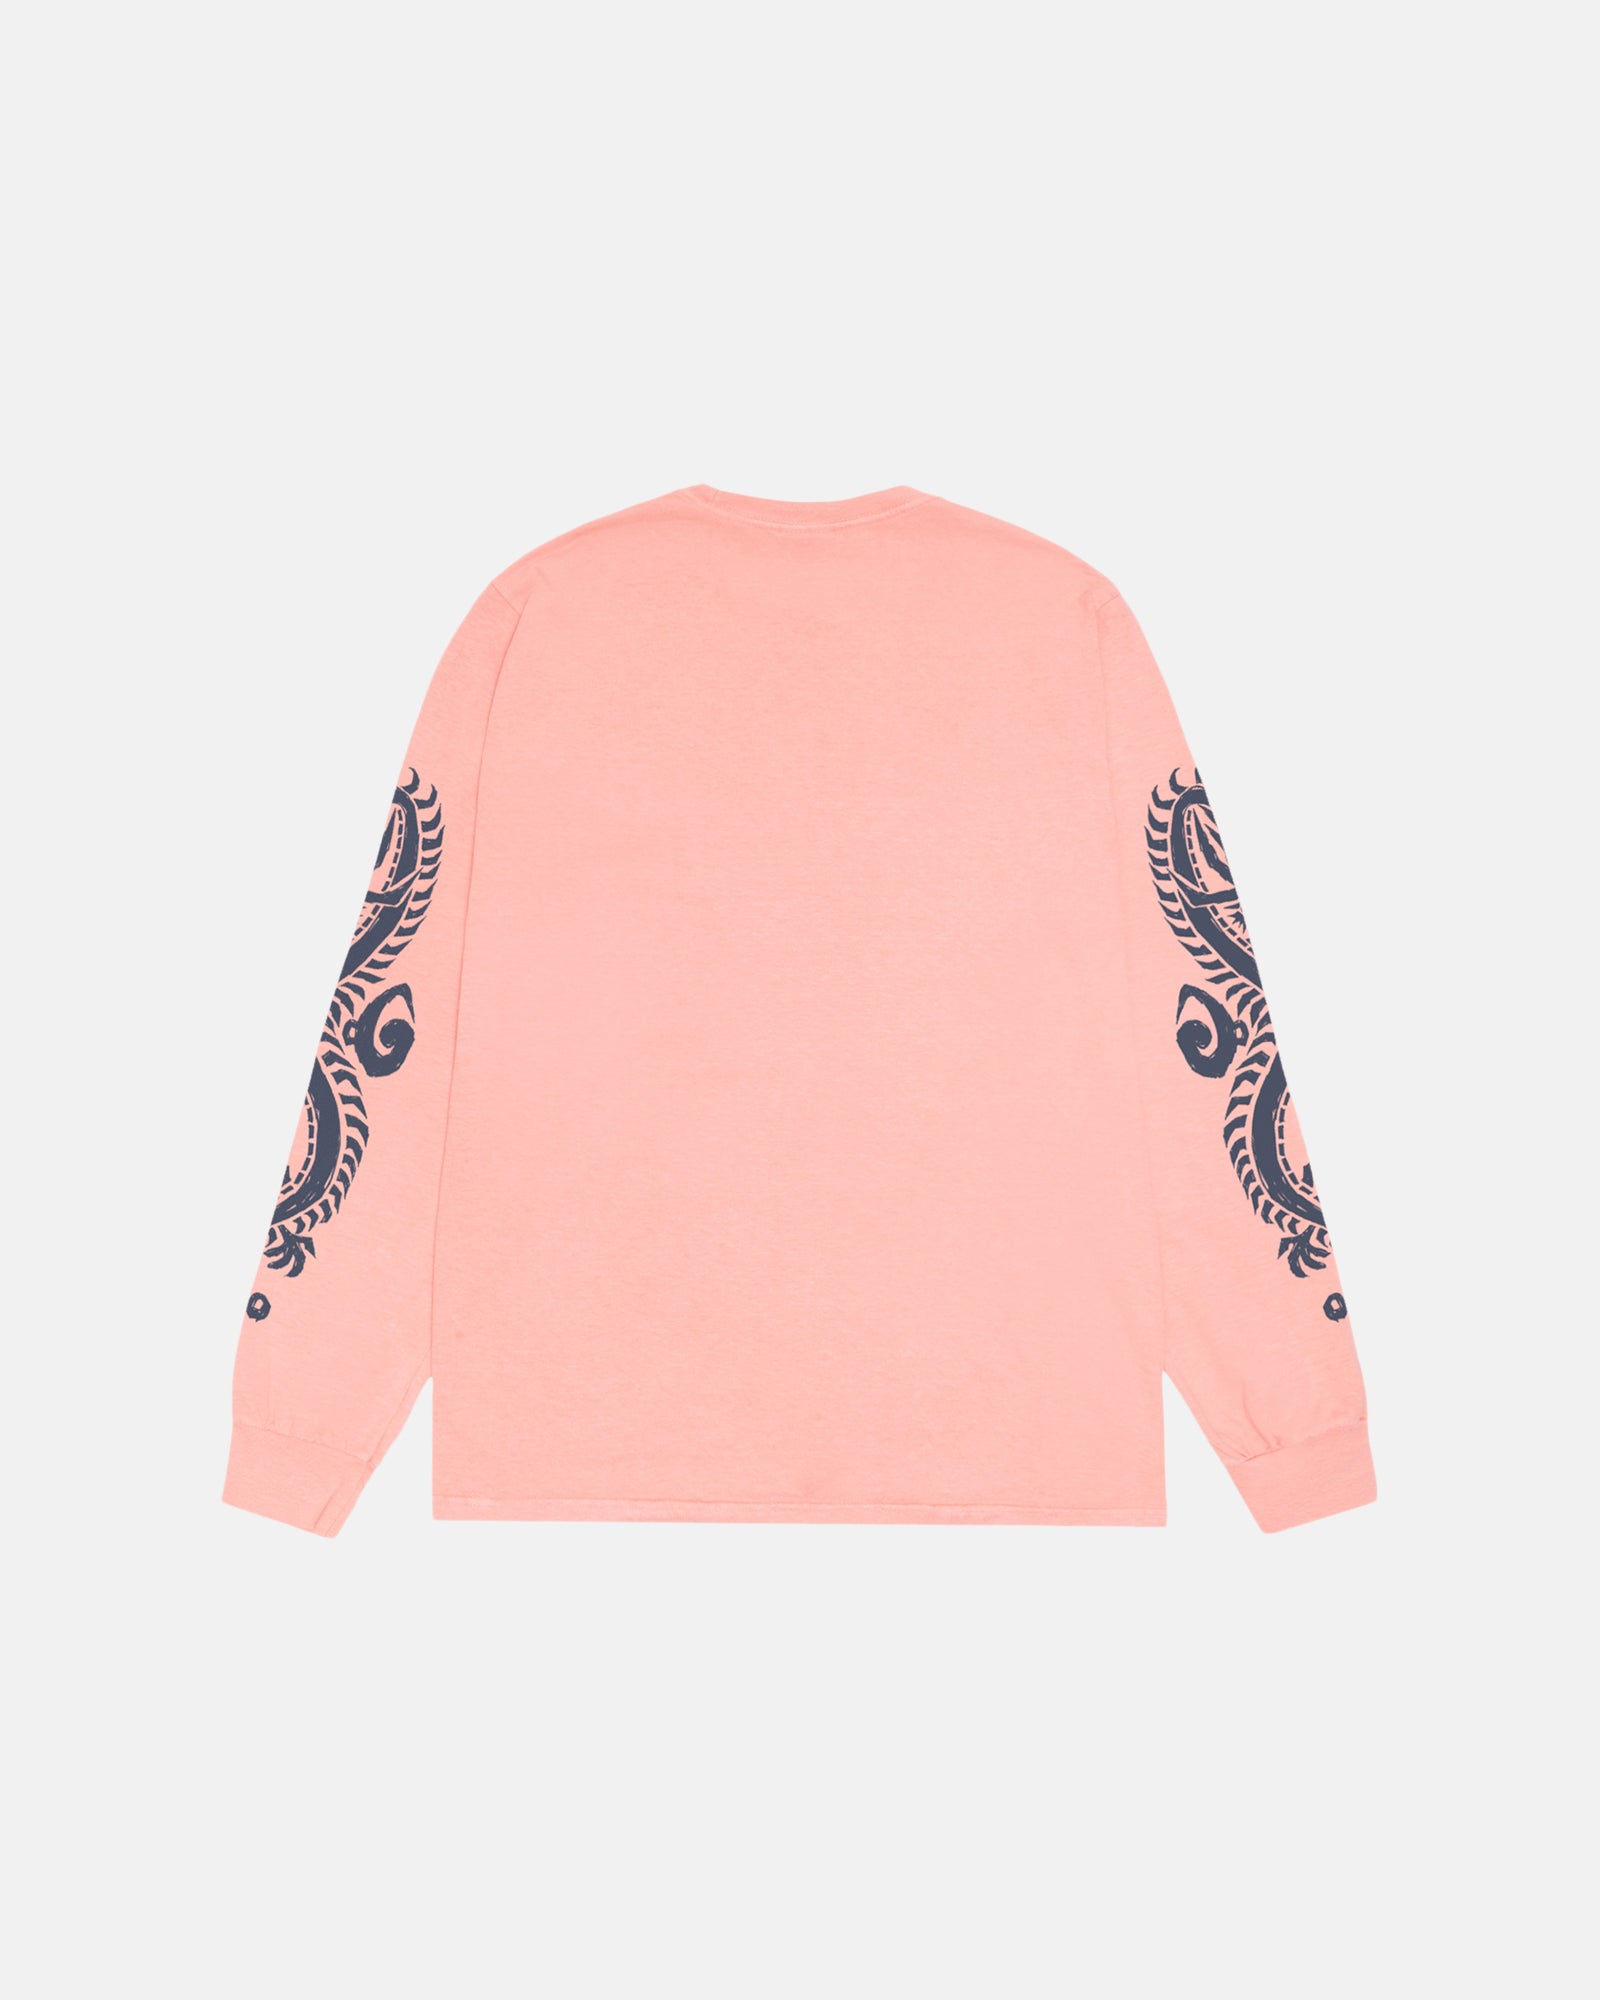 Stüssy Dragons Ls Tee Pigment Dyed Coral Longsleeve